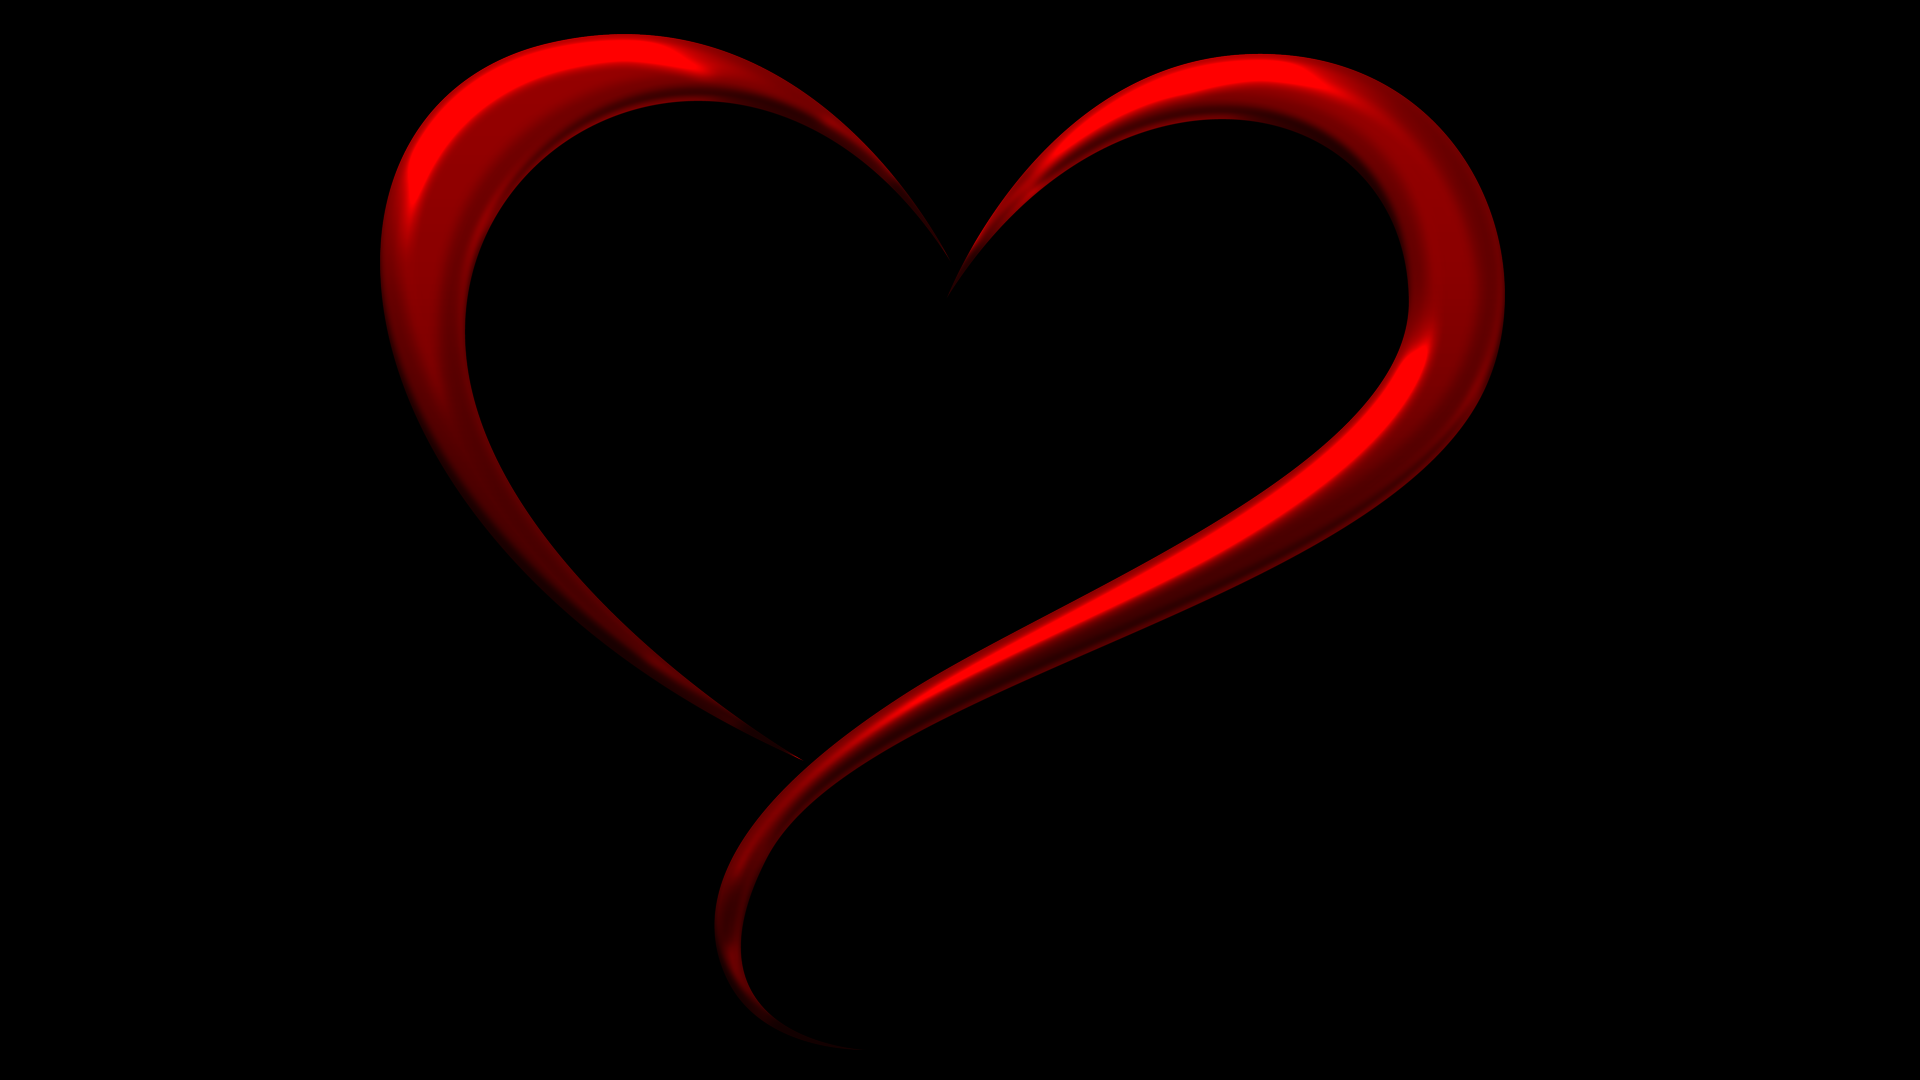 Wallpapers Id - - Black And Red Heart (#2195851) - HD Wallpaper ...